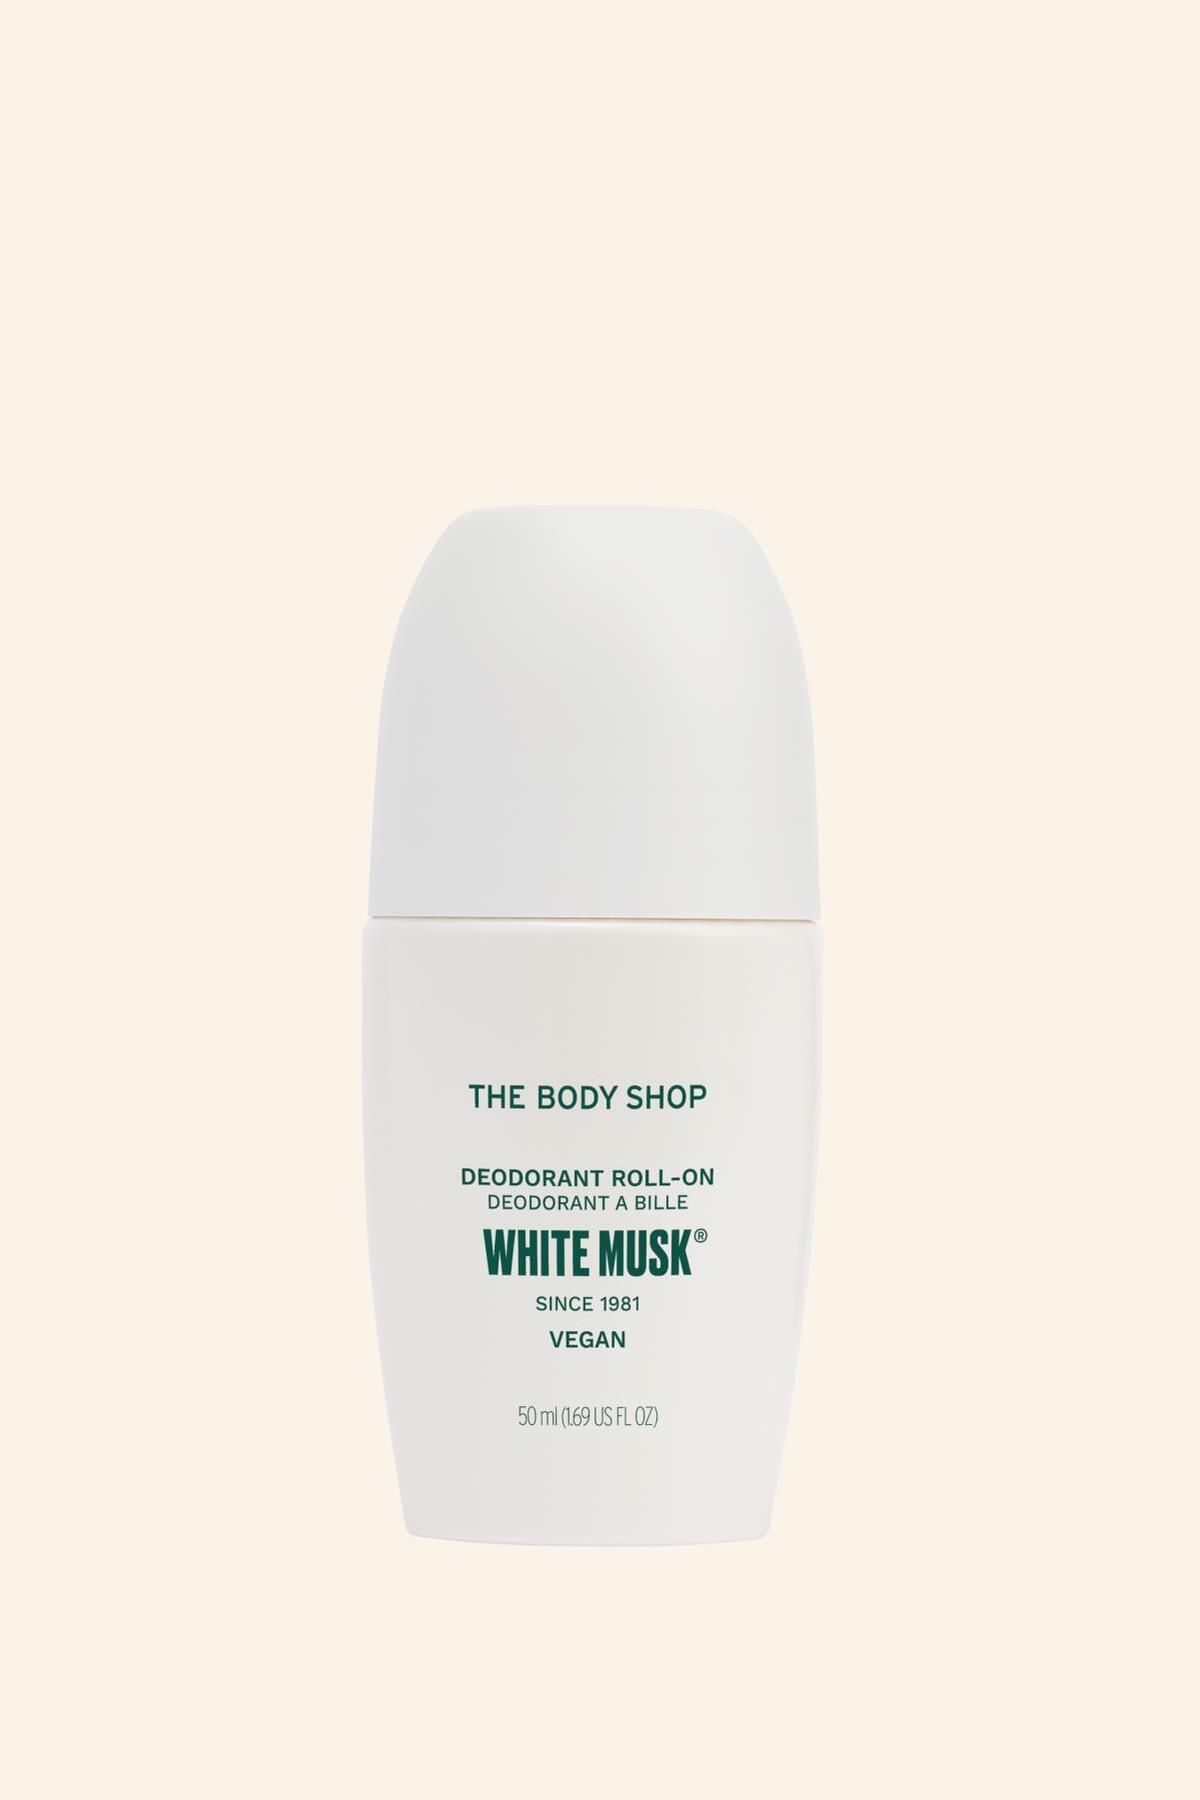 THE BODY SHOP White Musk® Roll-on Deodorant 50 ml